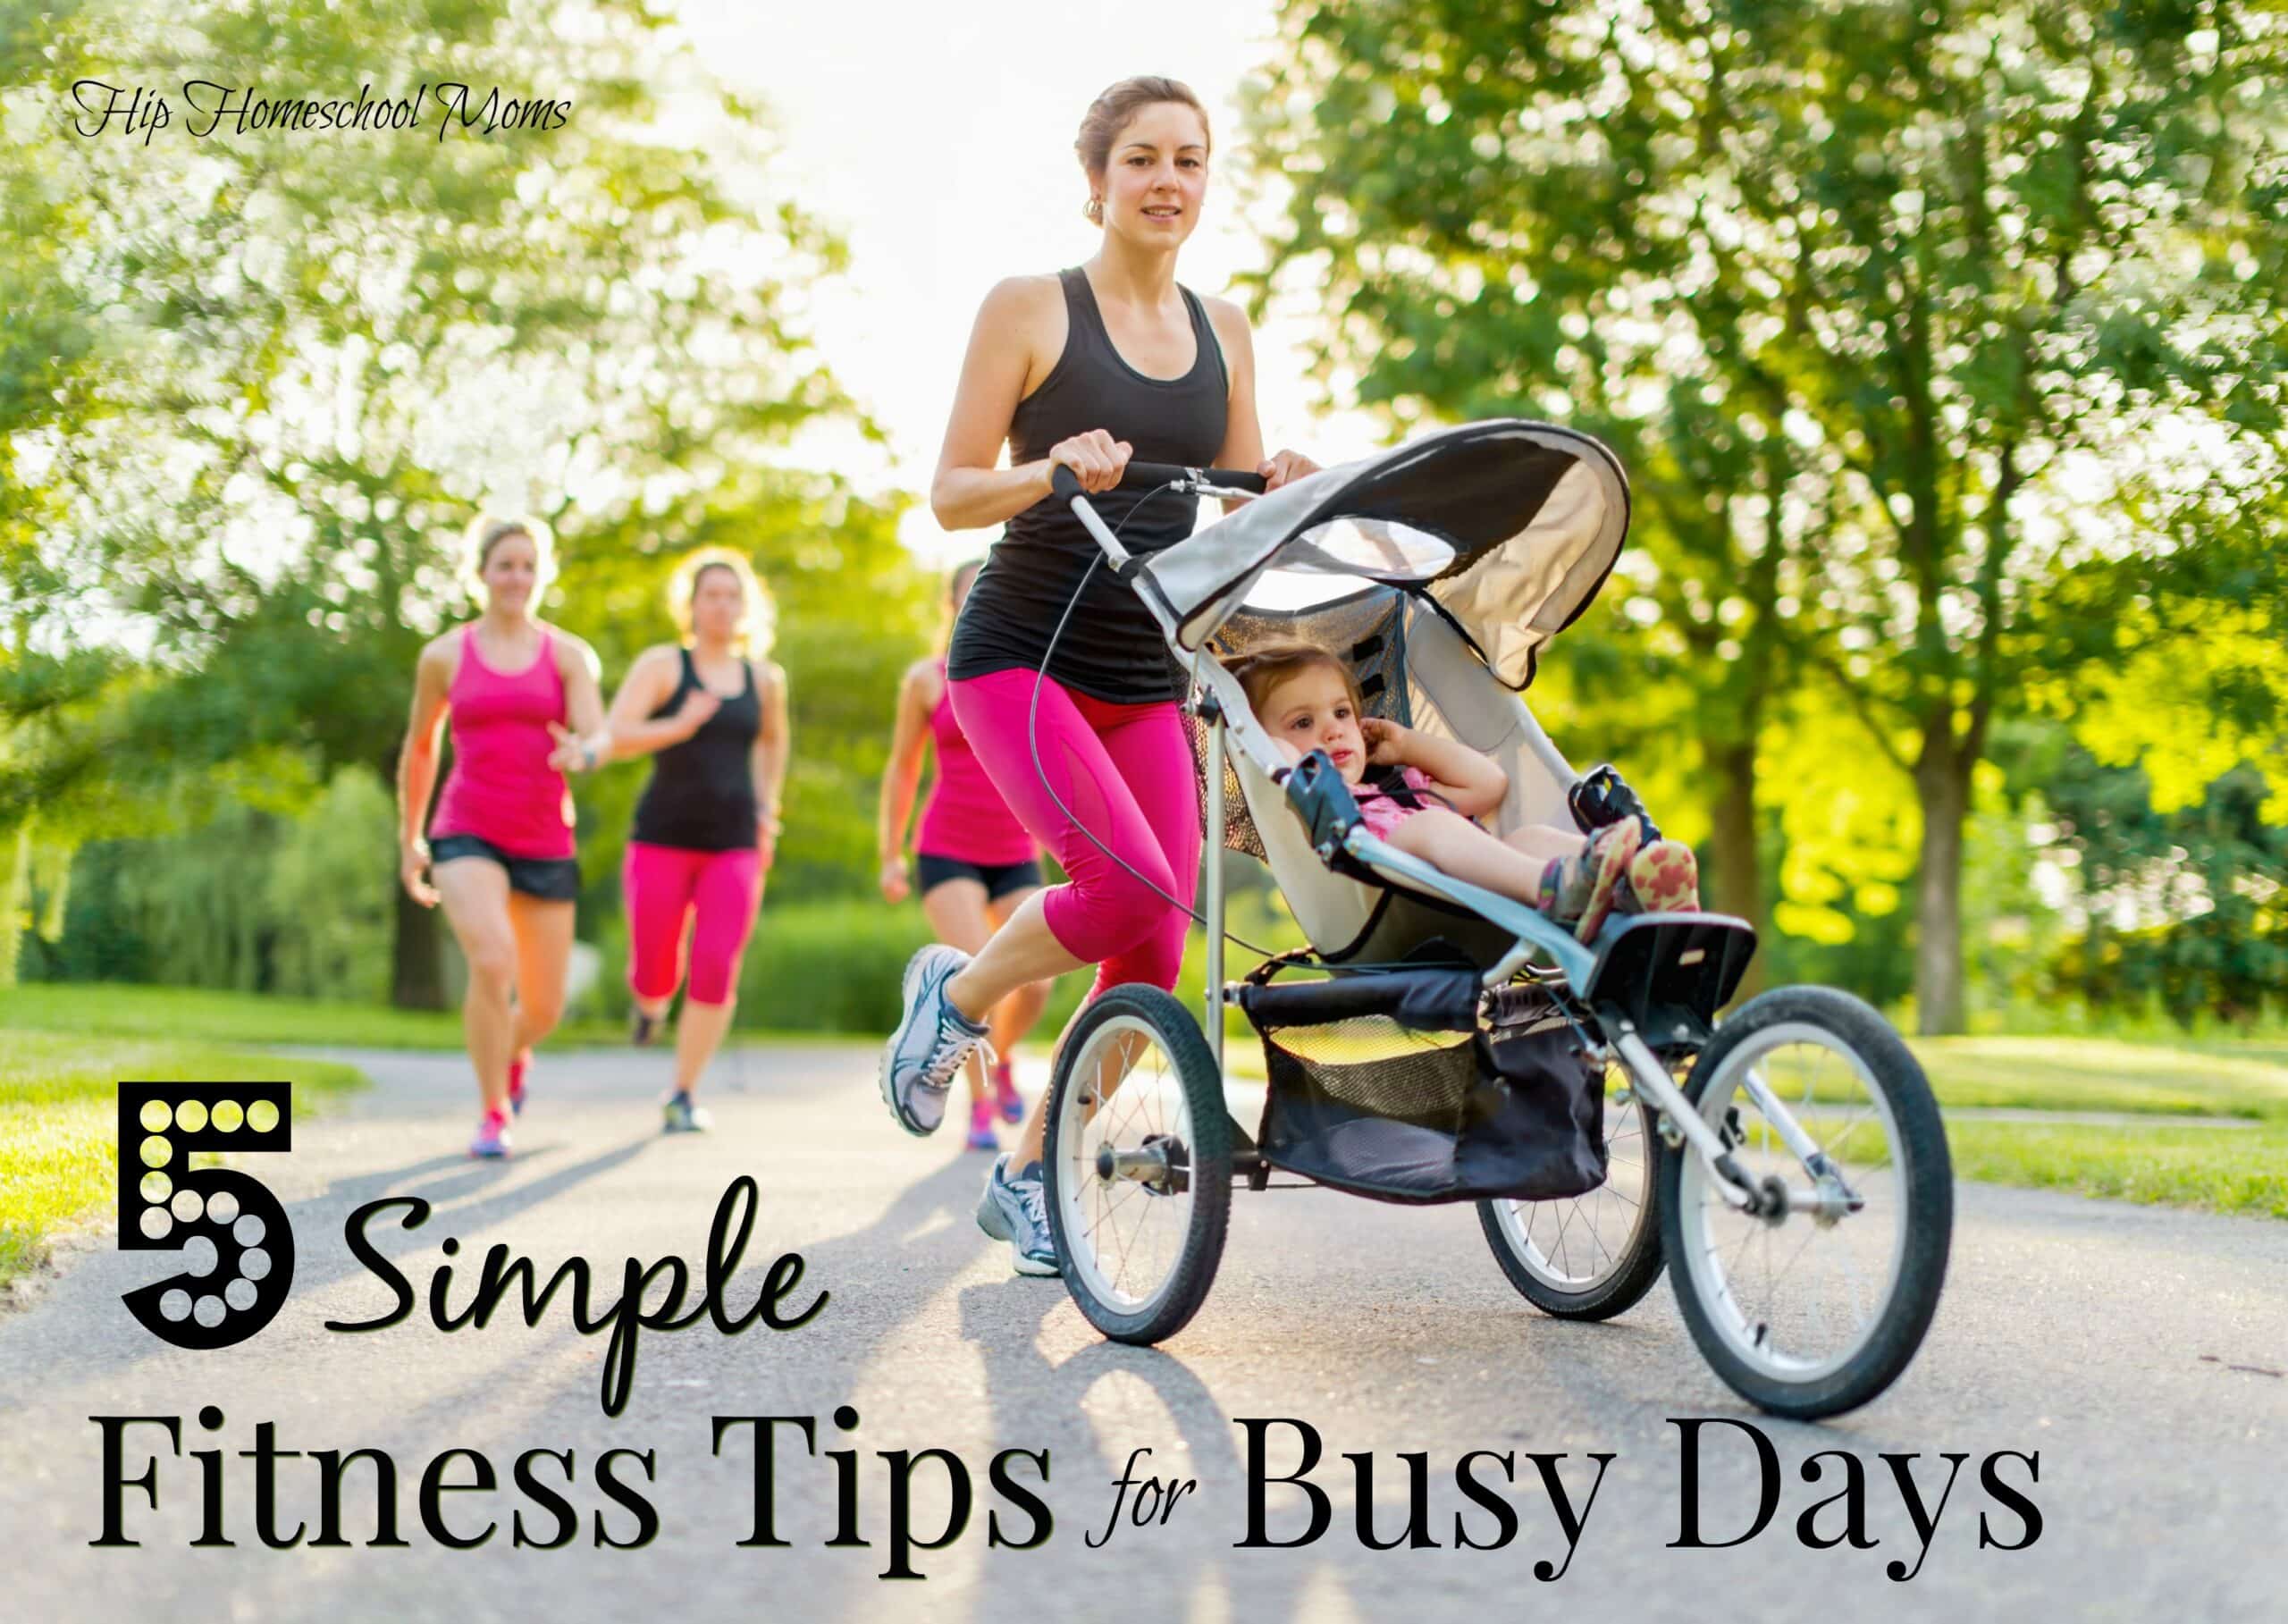 5 Simple Fitness Tips for Busy Days